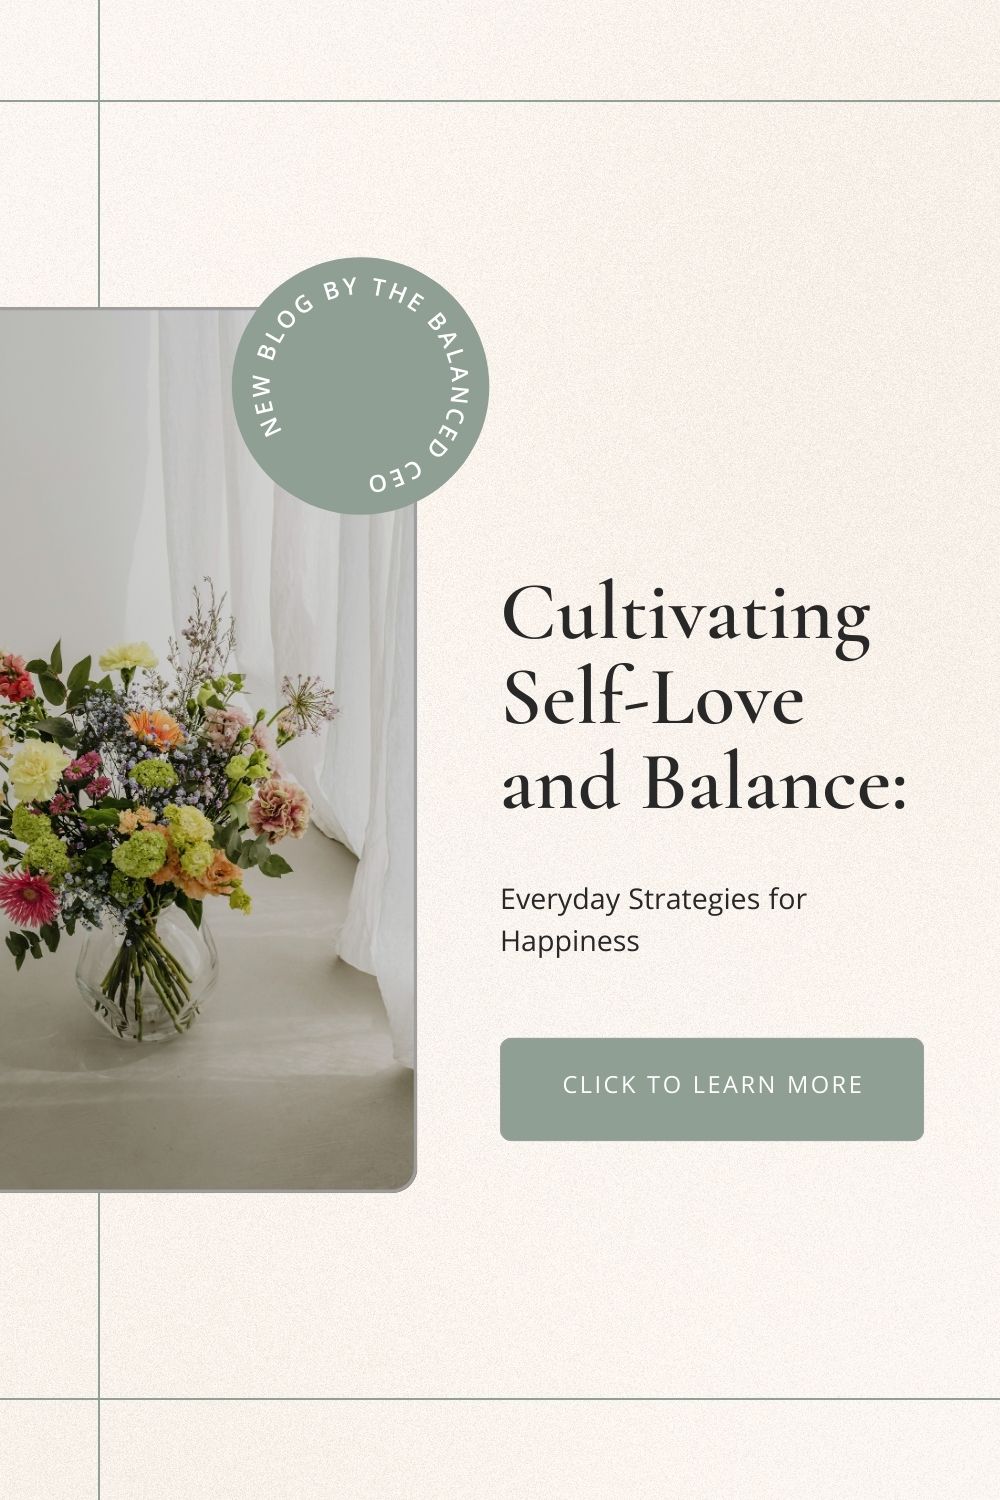 Cultivating Self-Love and Balance: Everyday Strategies for Happiness